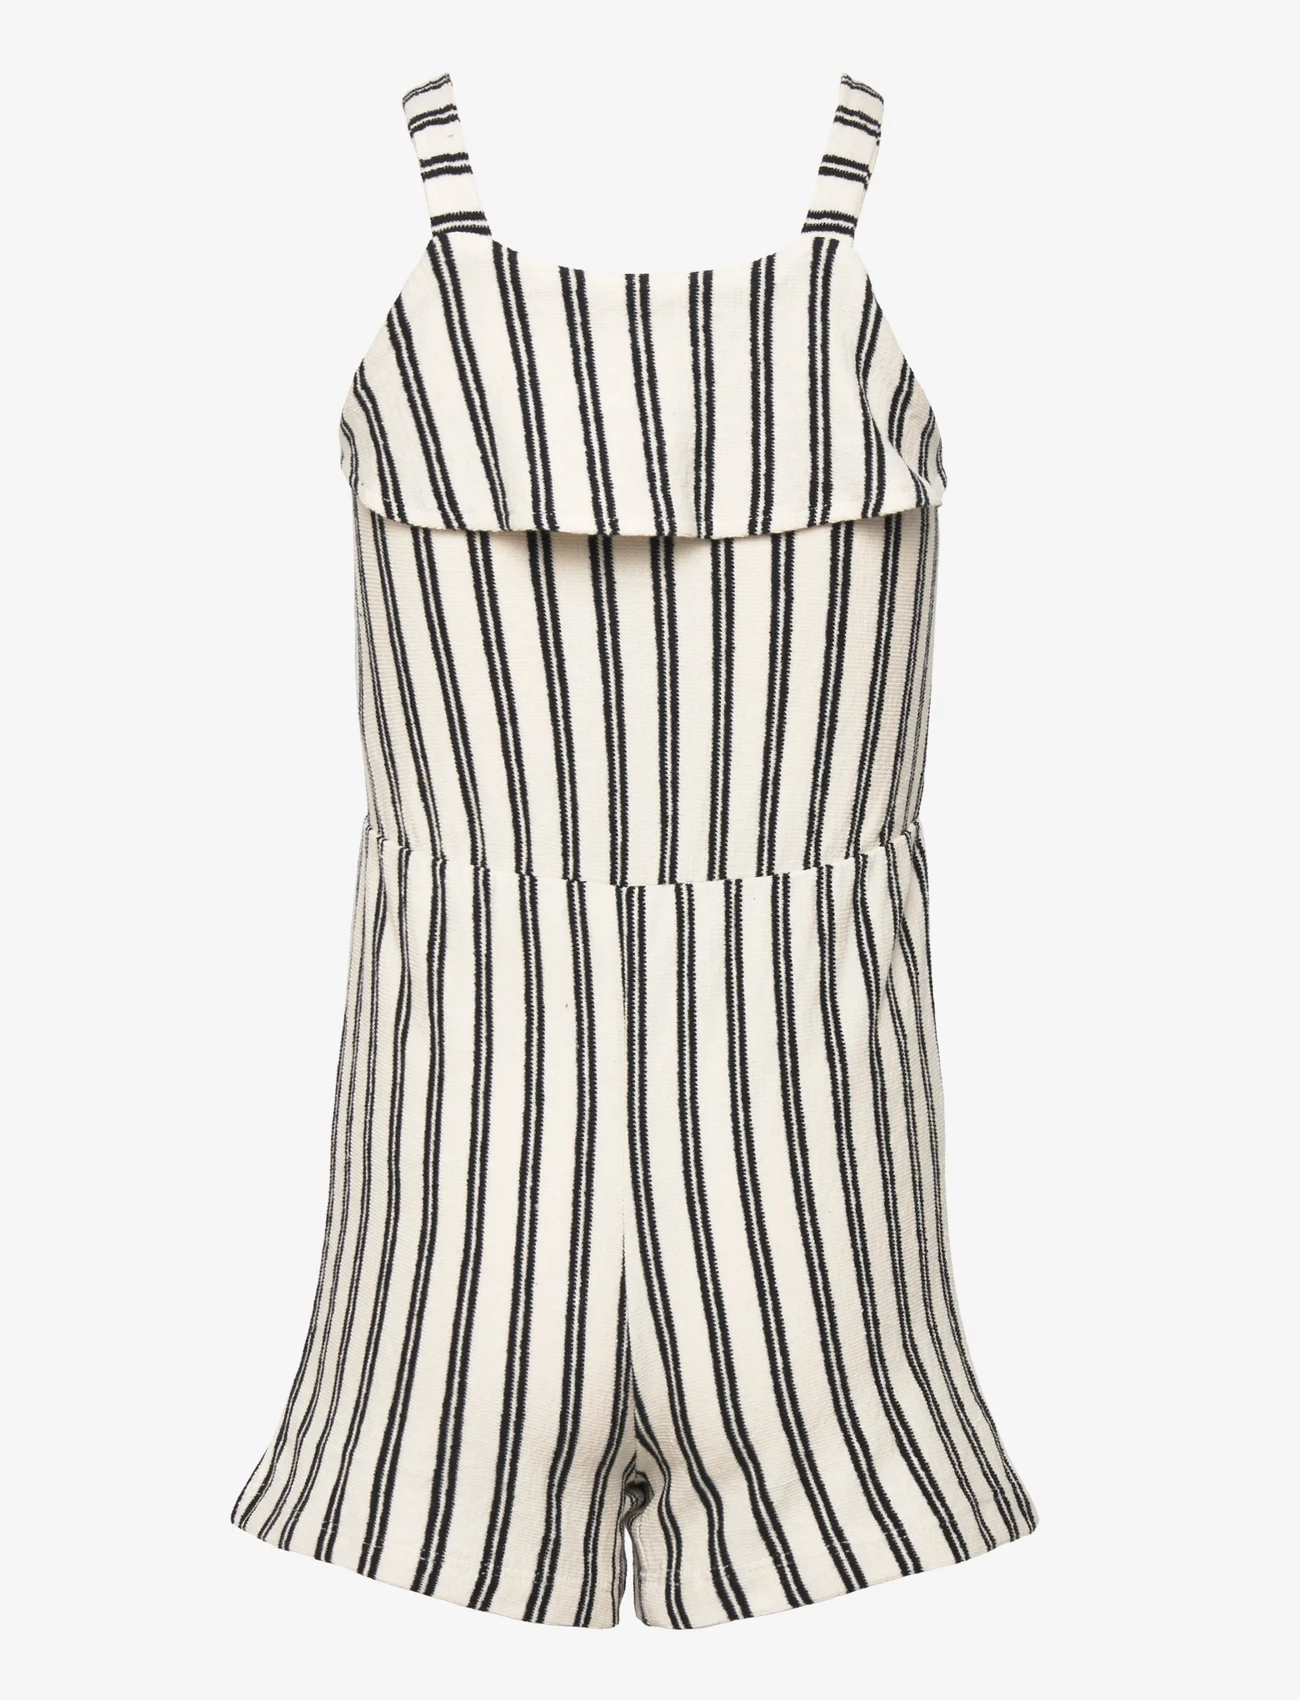 Mango - Striped jumpsuit - sommarfynd - natural white - 1